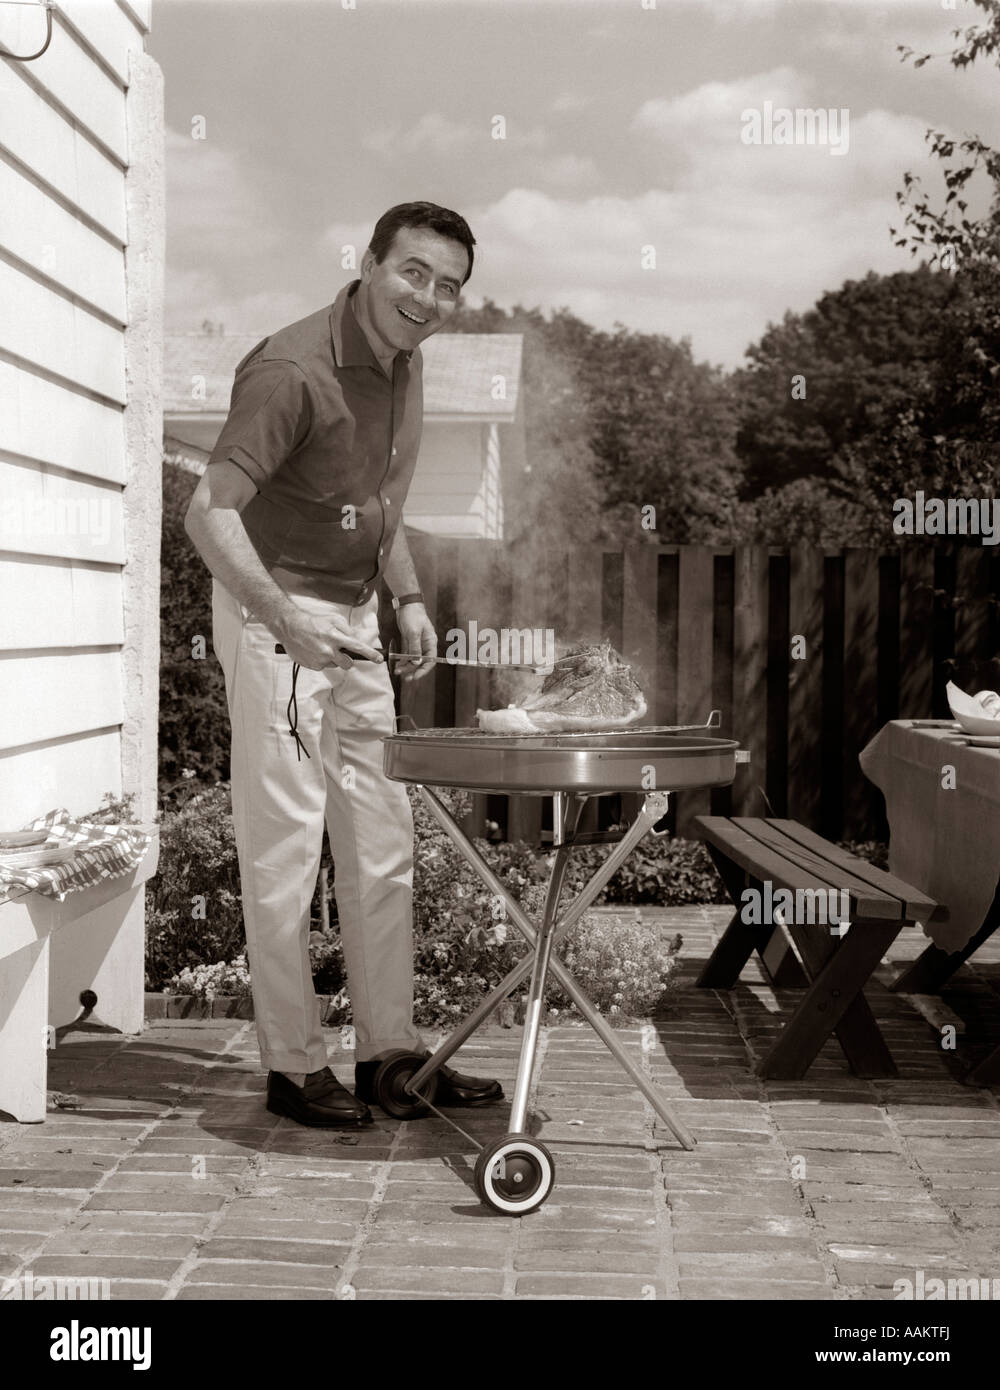 1960s HEAD-ON VIEW OF MAN BACKYARD PATIO COOKING STEAK ON GRILL Stock Photo